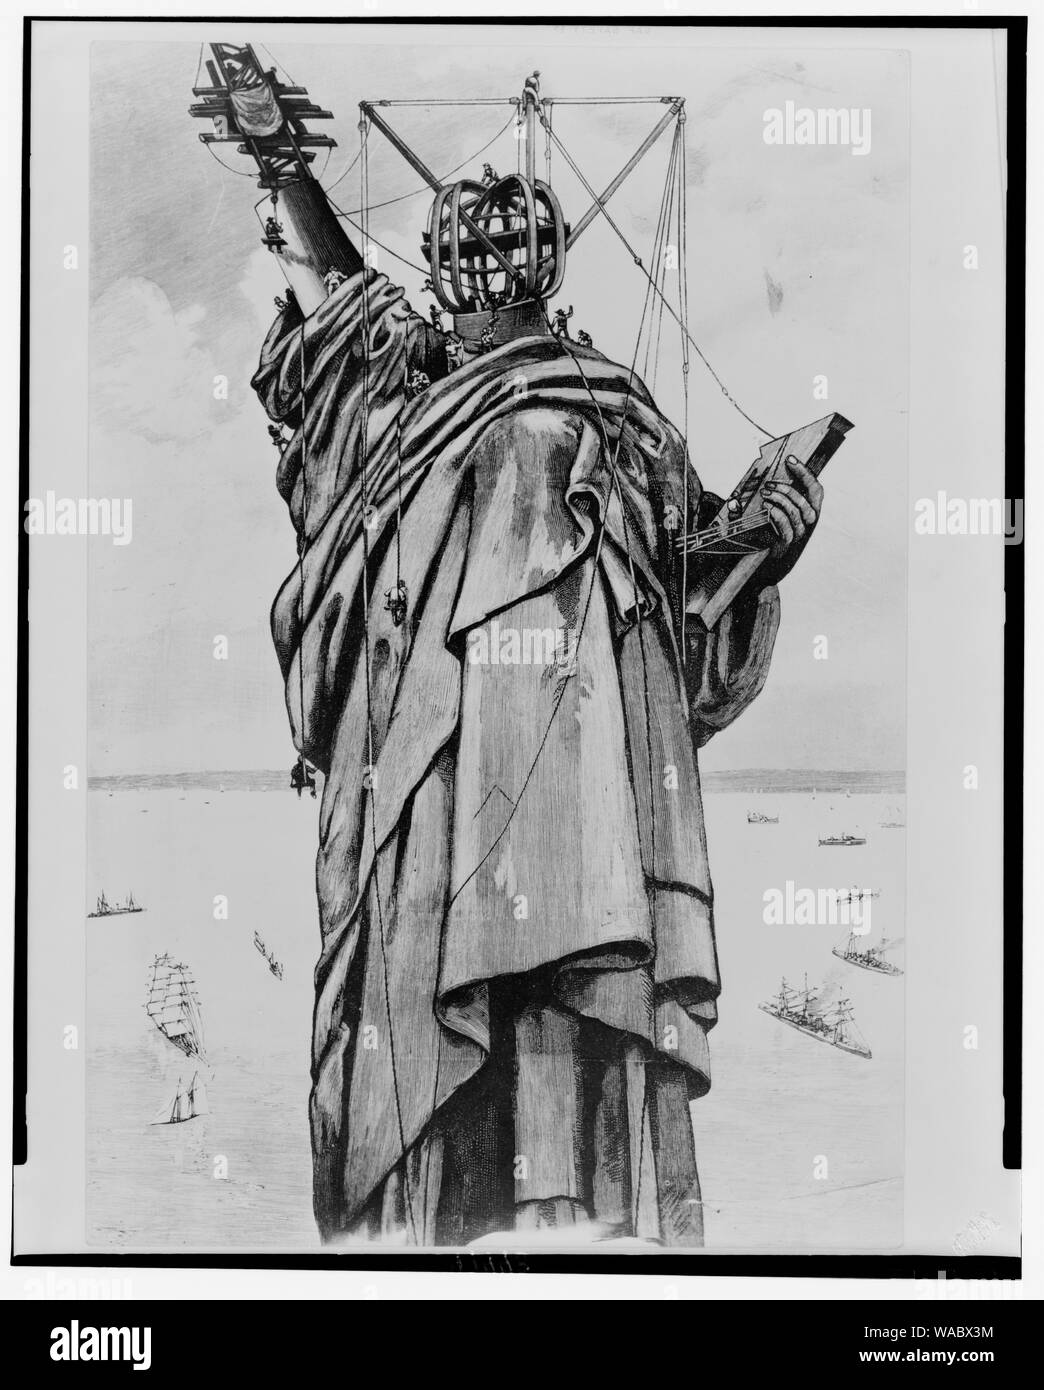 Construction of the Statue of Liberty]: Re-constructing the statue on Bedloe's Island Stock Photo